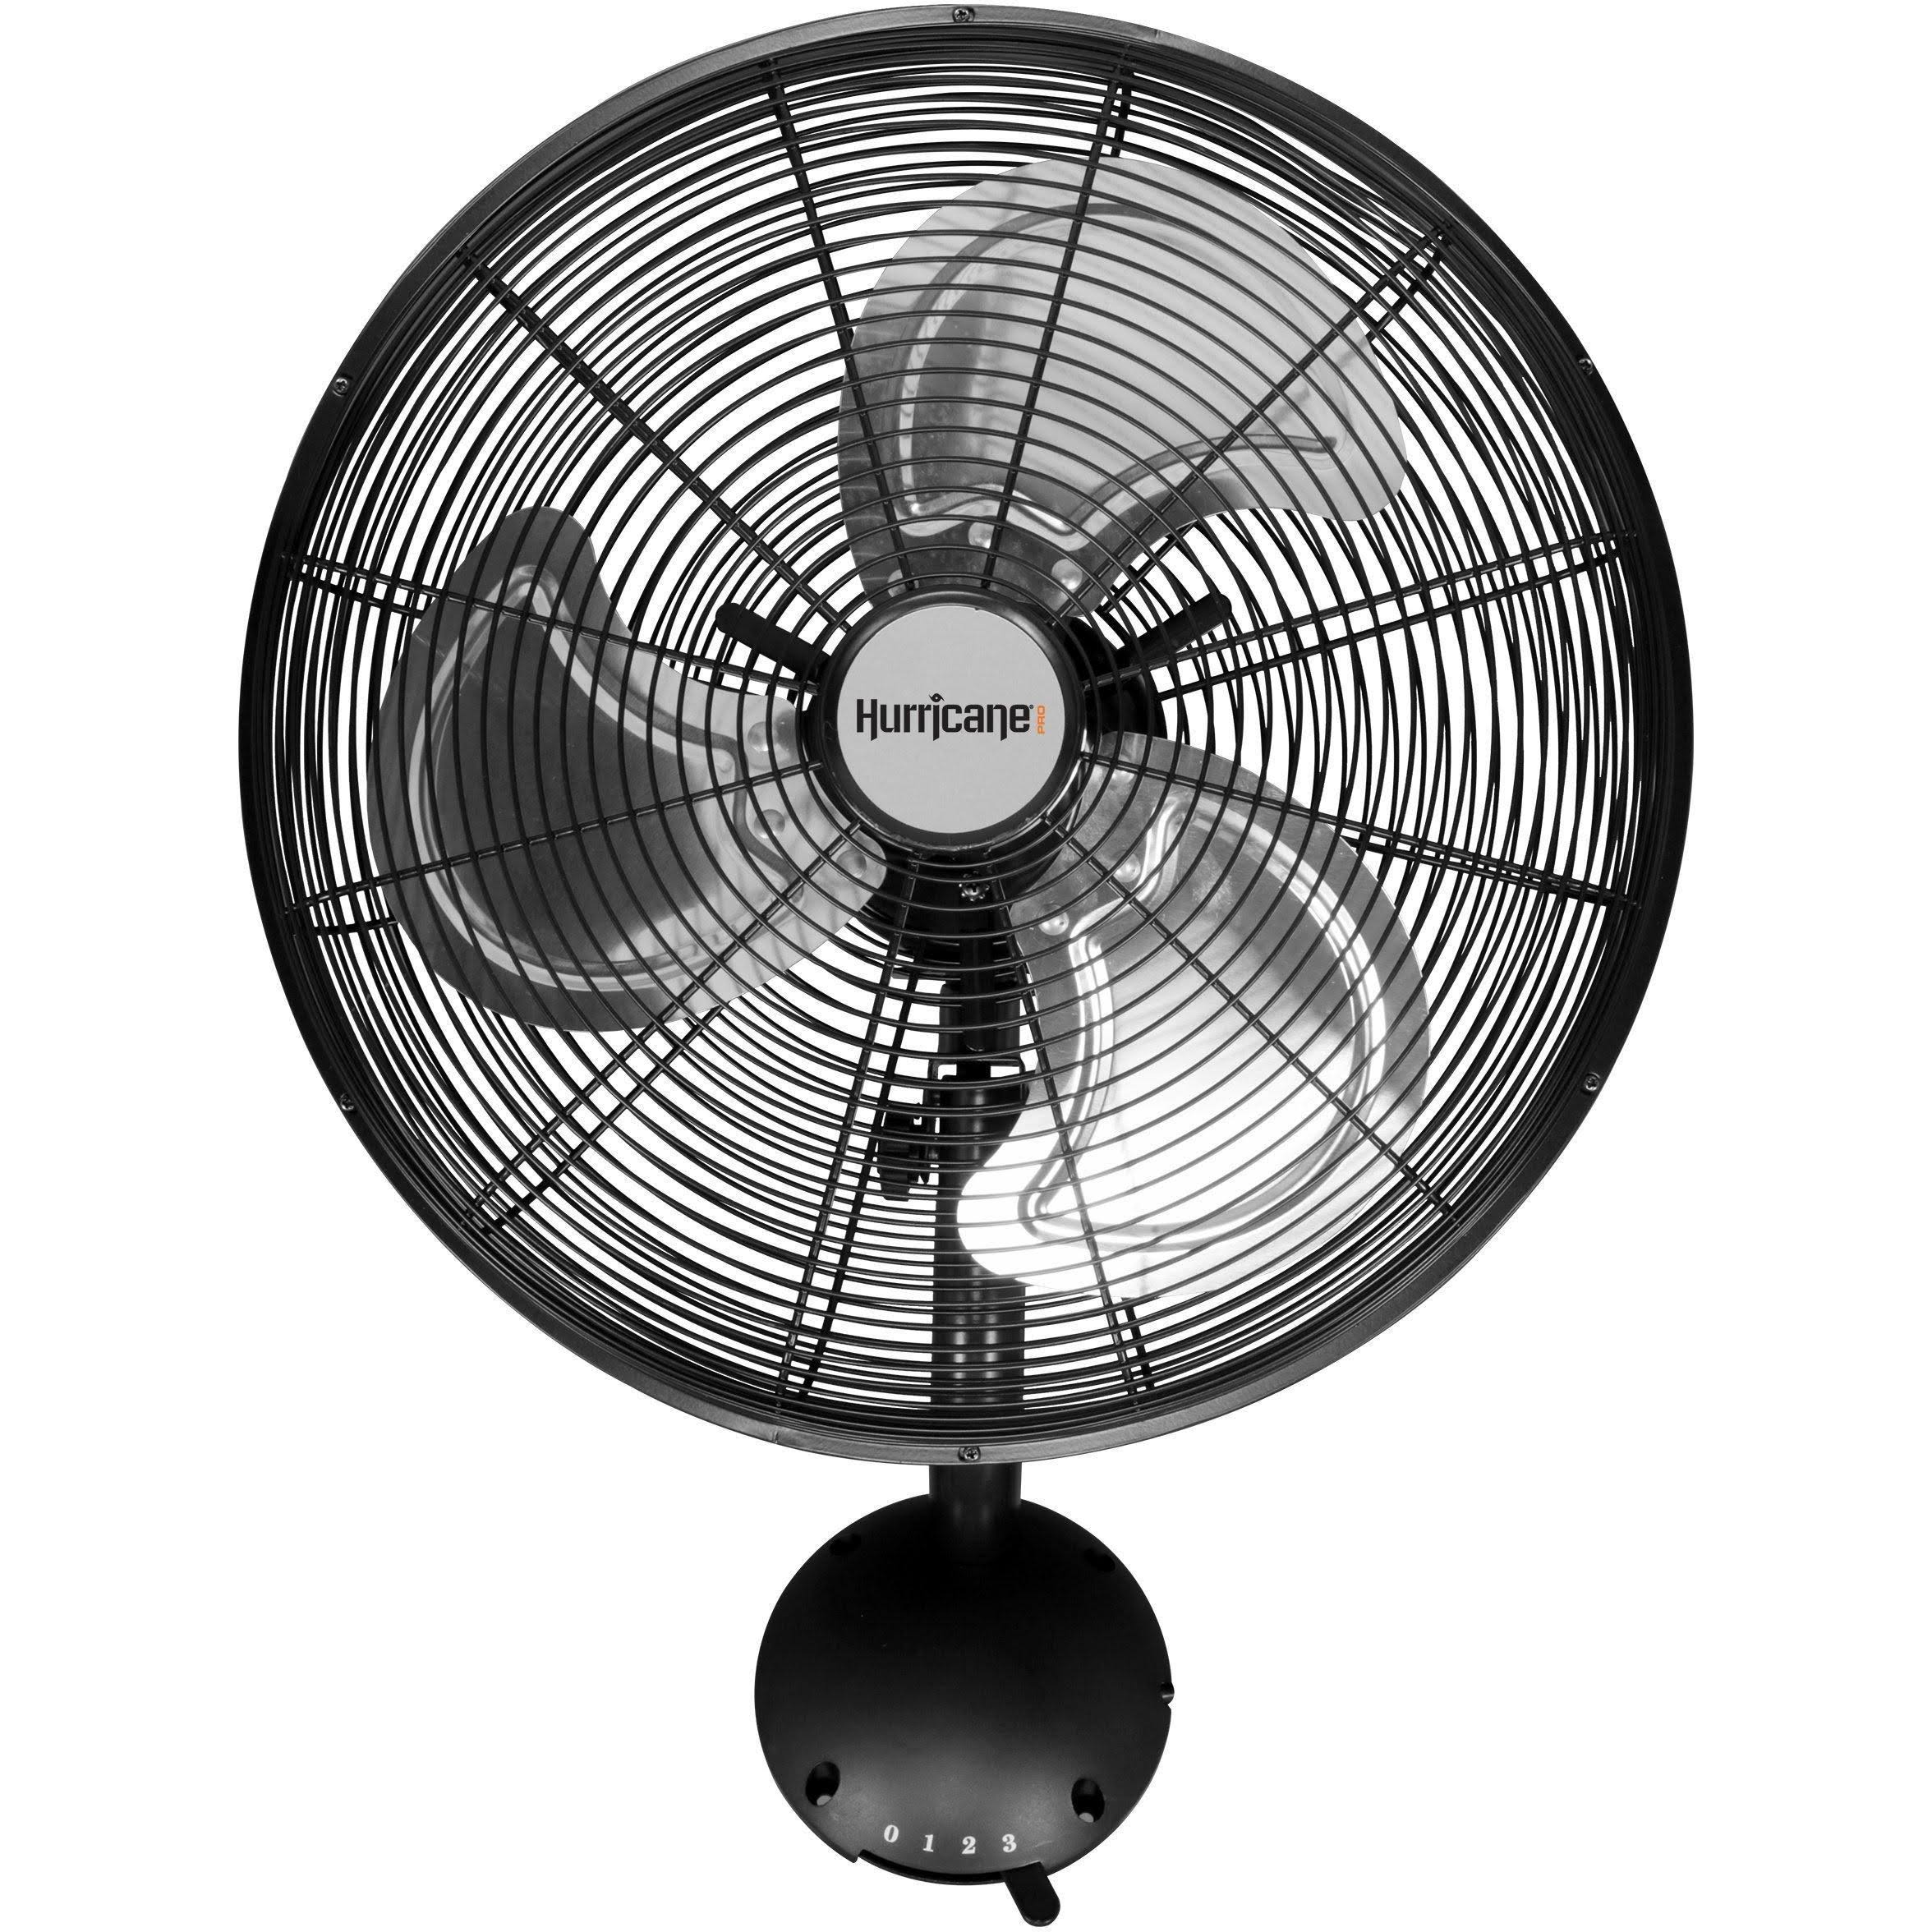 Hurricane Wall Mount Fan - 16 Inch, Pro Series, High Velocity, Heavy Duty Metal Wall Mount Fan for Industrial, Commercial, Residential, and Greenhouse